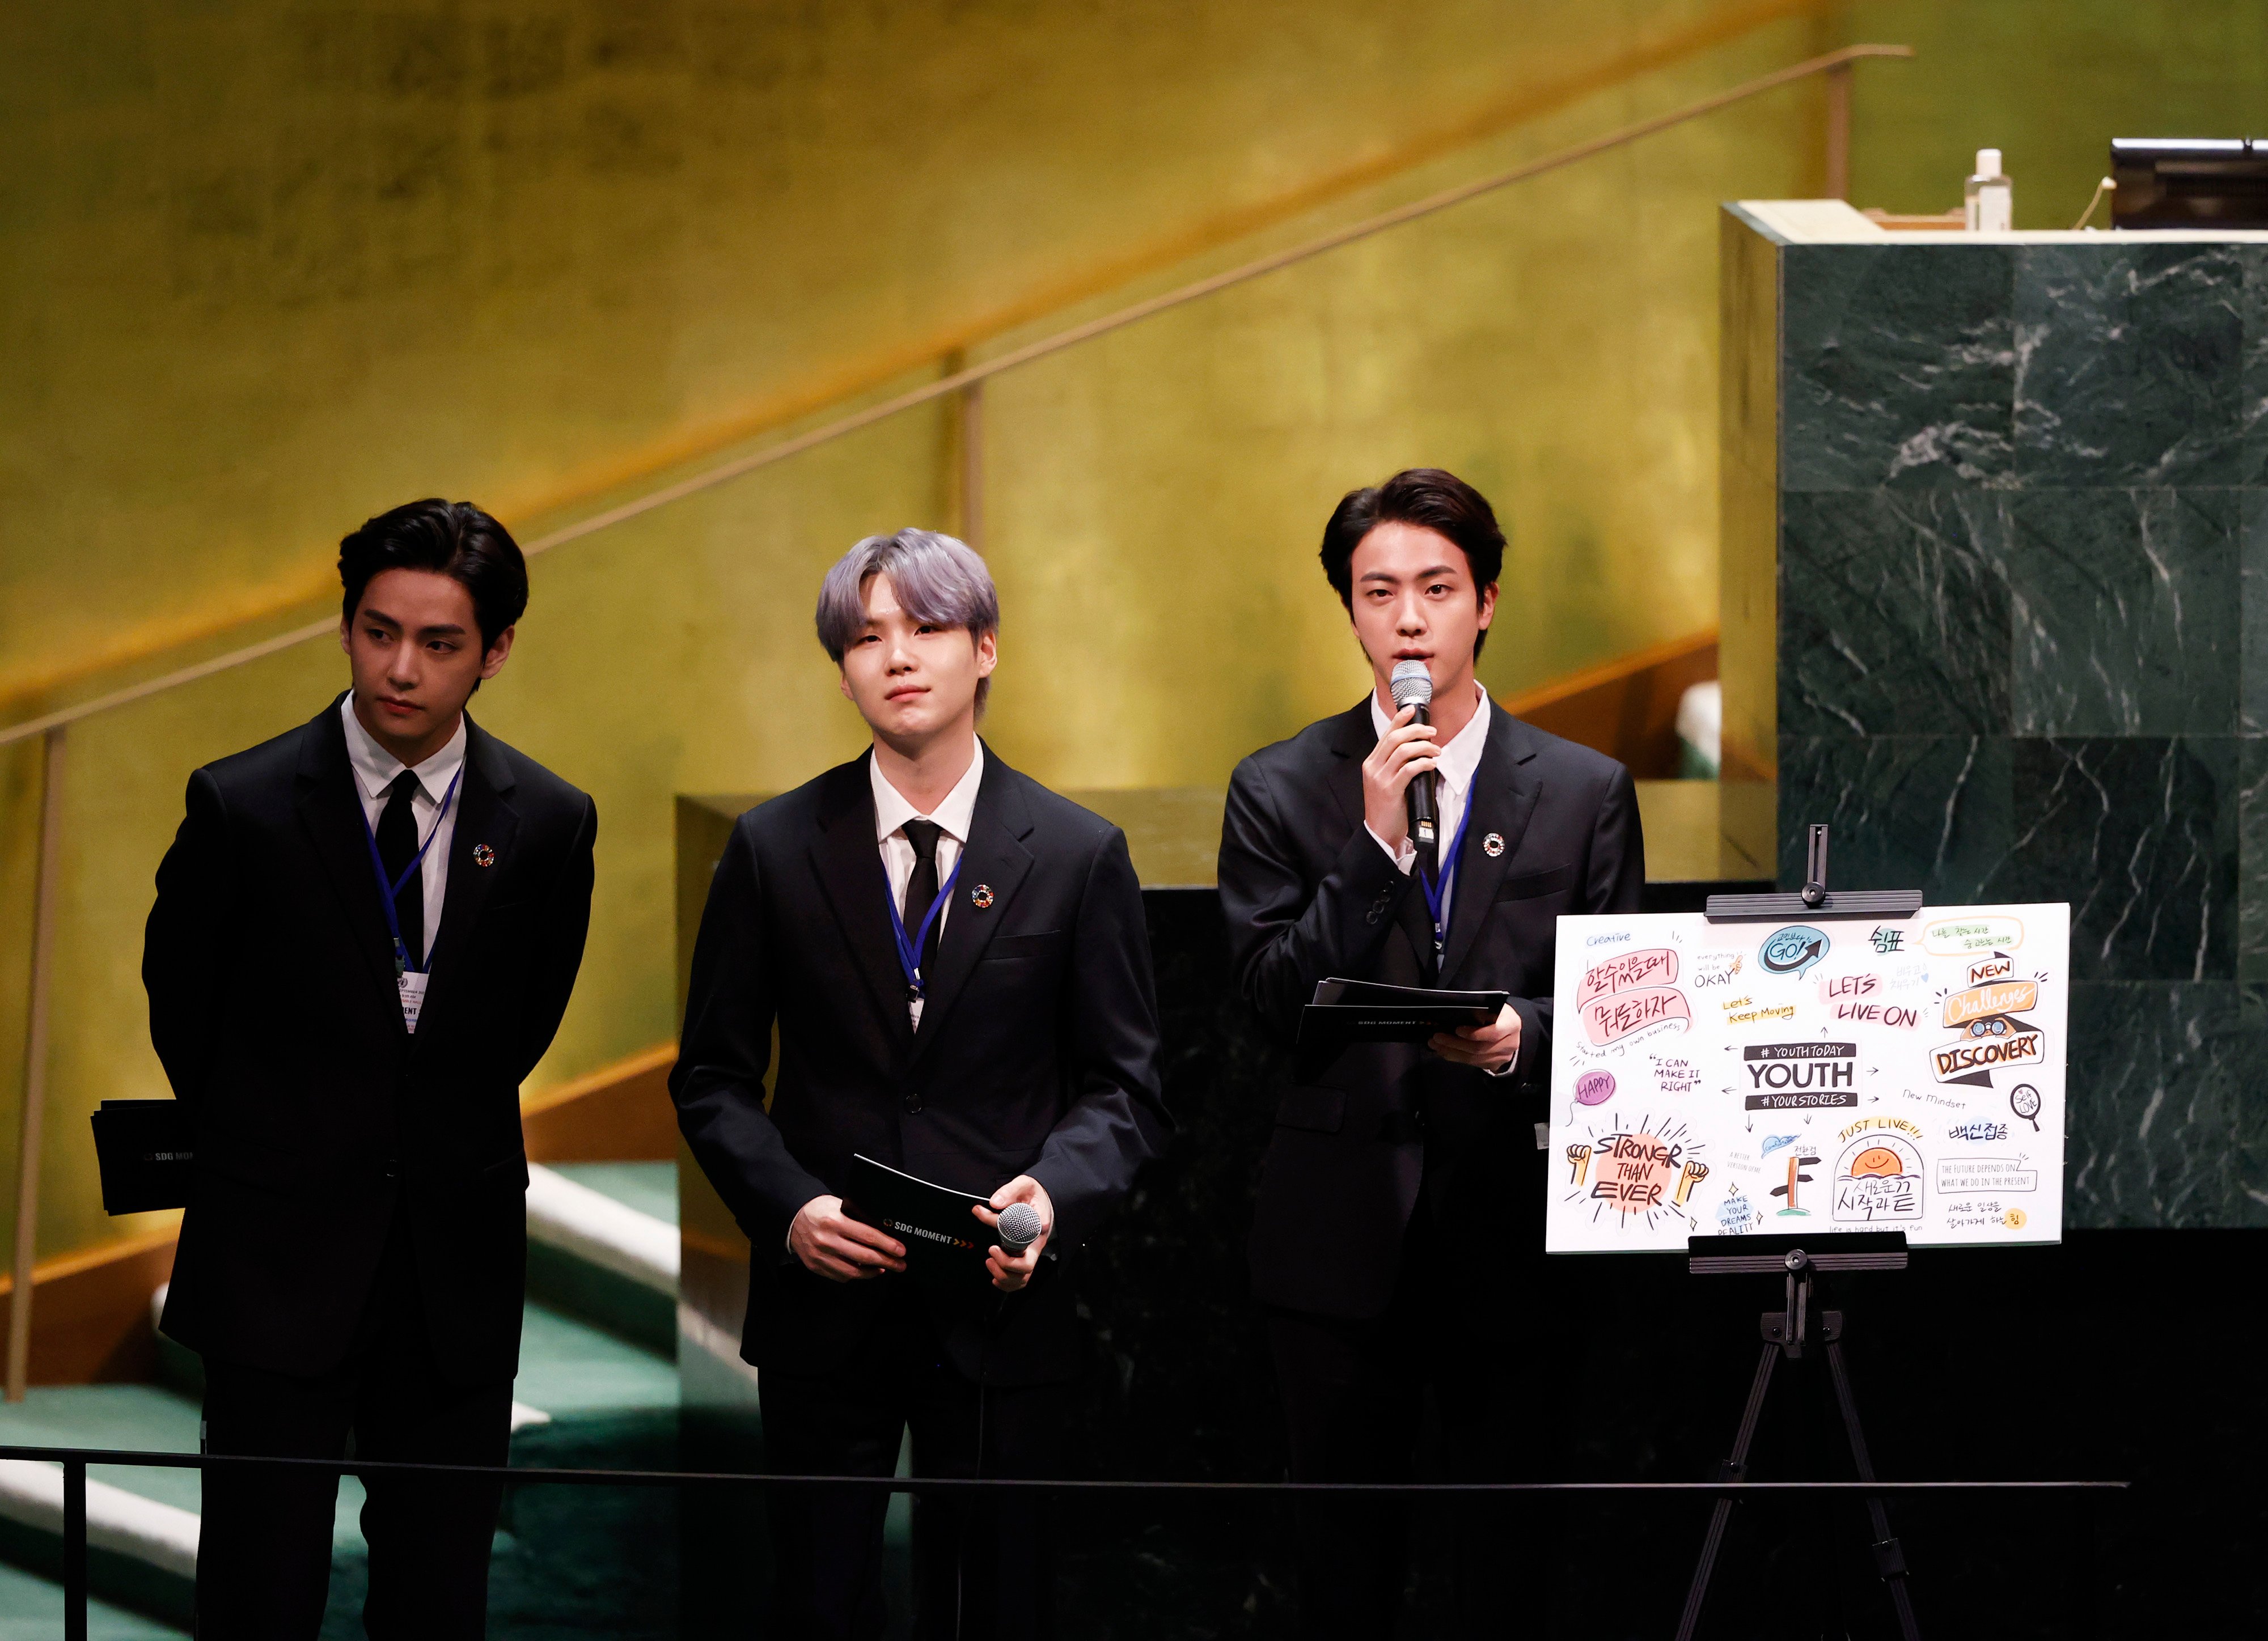 Taehyung/V, Suga, and Jin of BTS take turns speaking at the SDG Moment event as part of the UN General Assembly 76th session